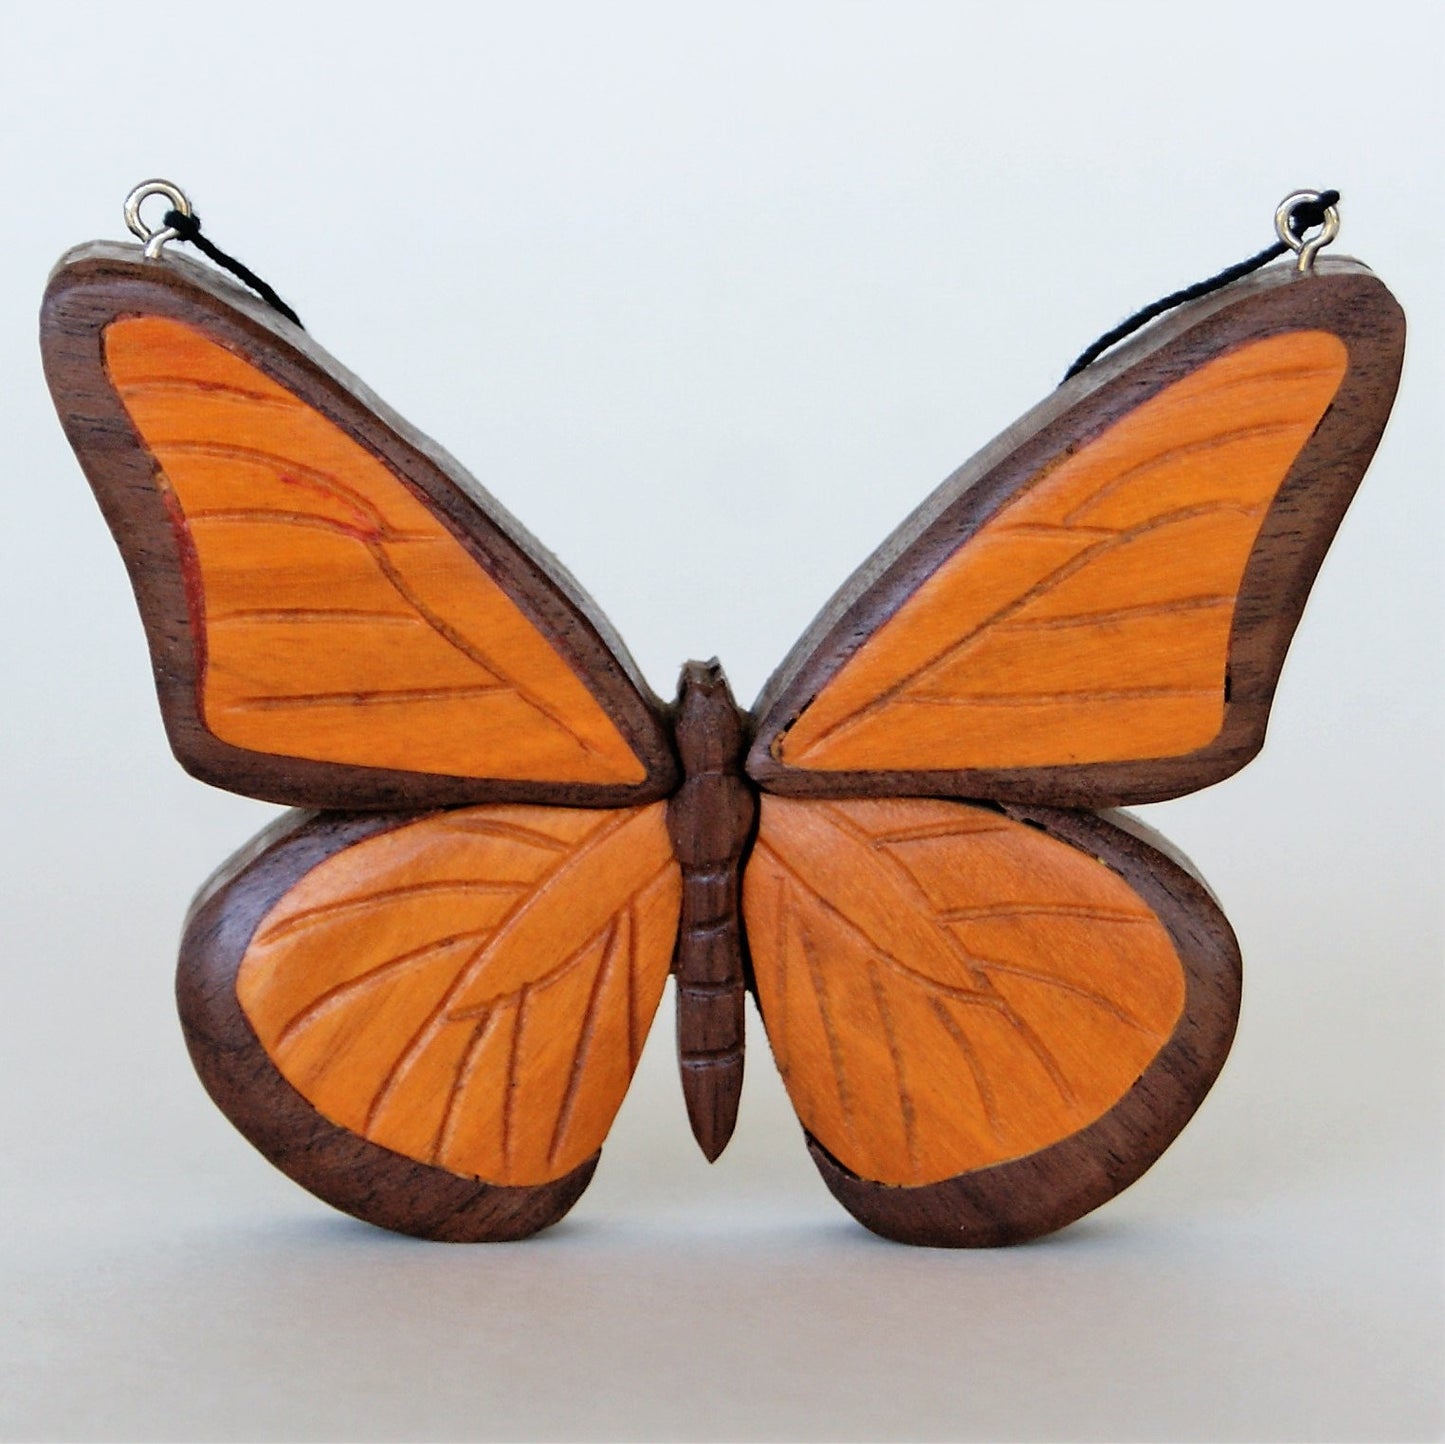 Butterfly Magnet / Ornament